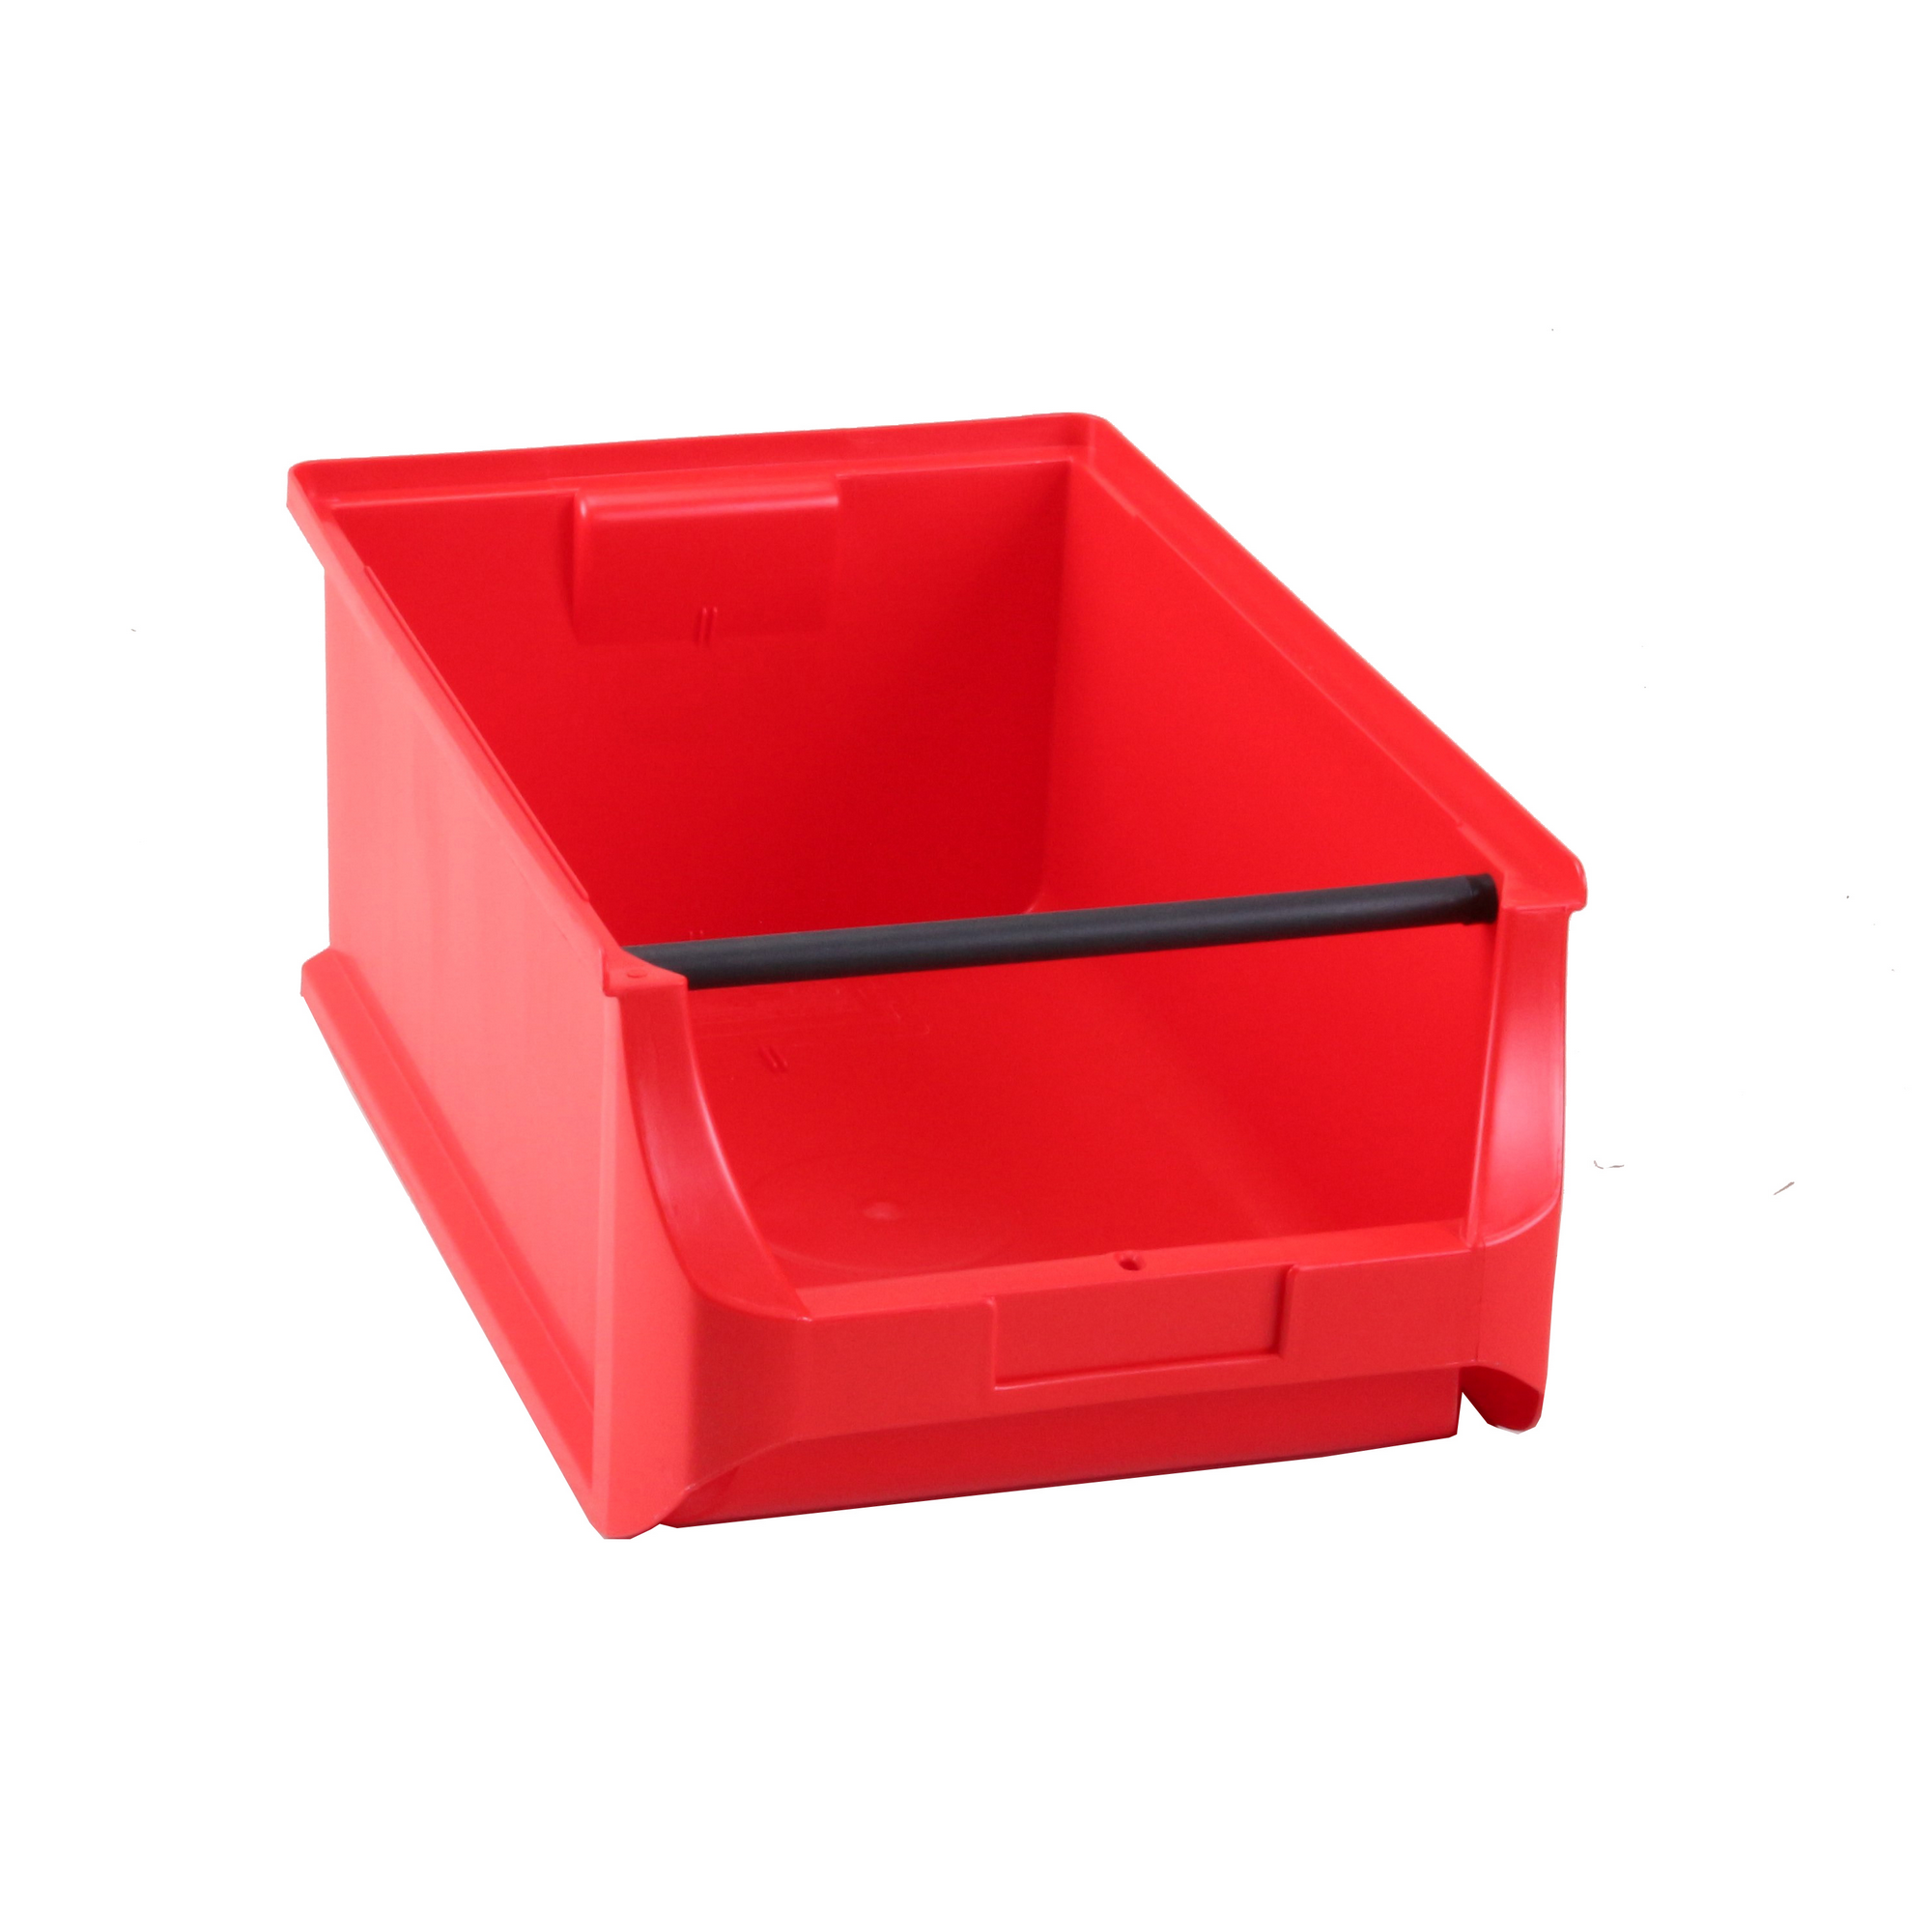 ProfiPlus Stapelsichtbox 'Box 5' rot 50 x 31 x 20 cm + product picture